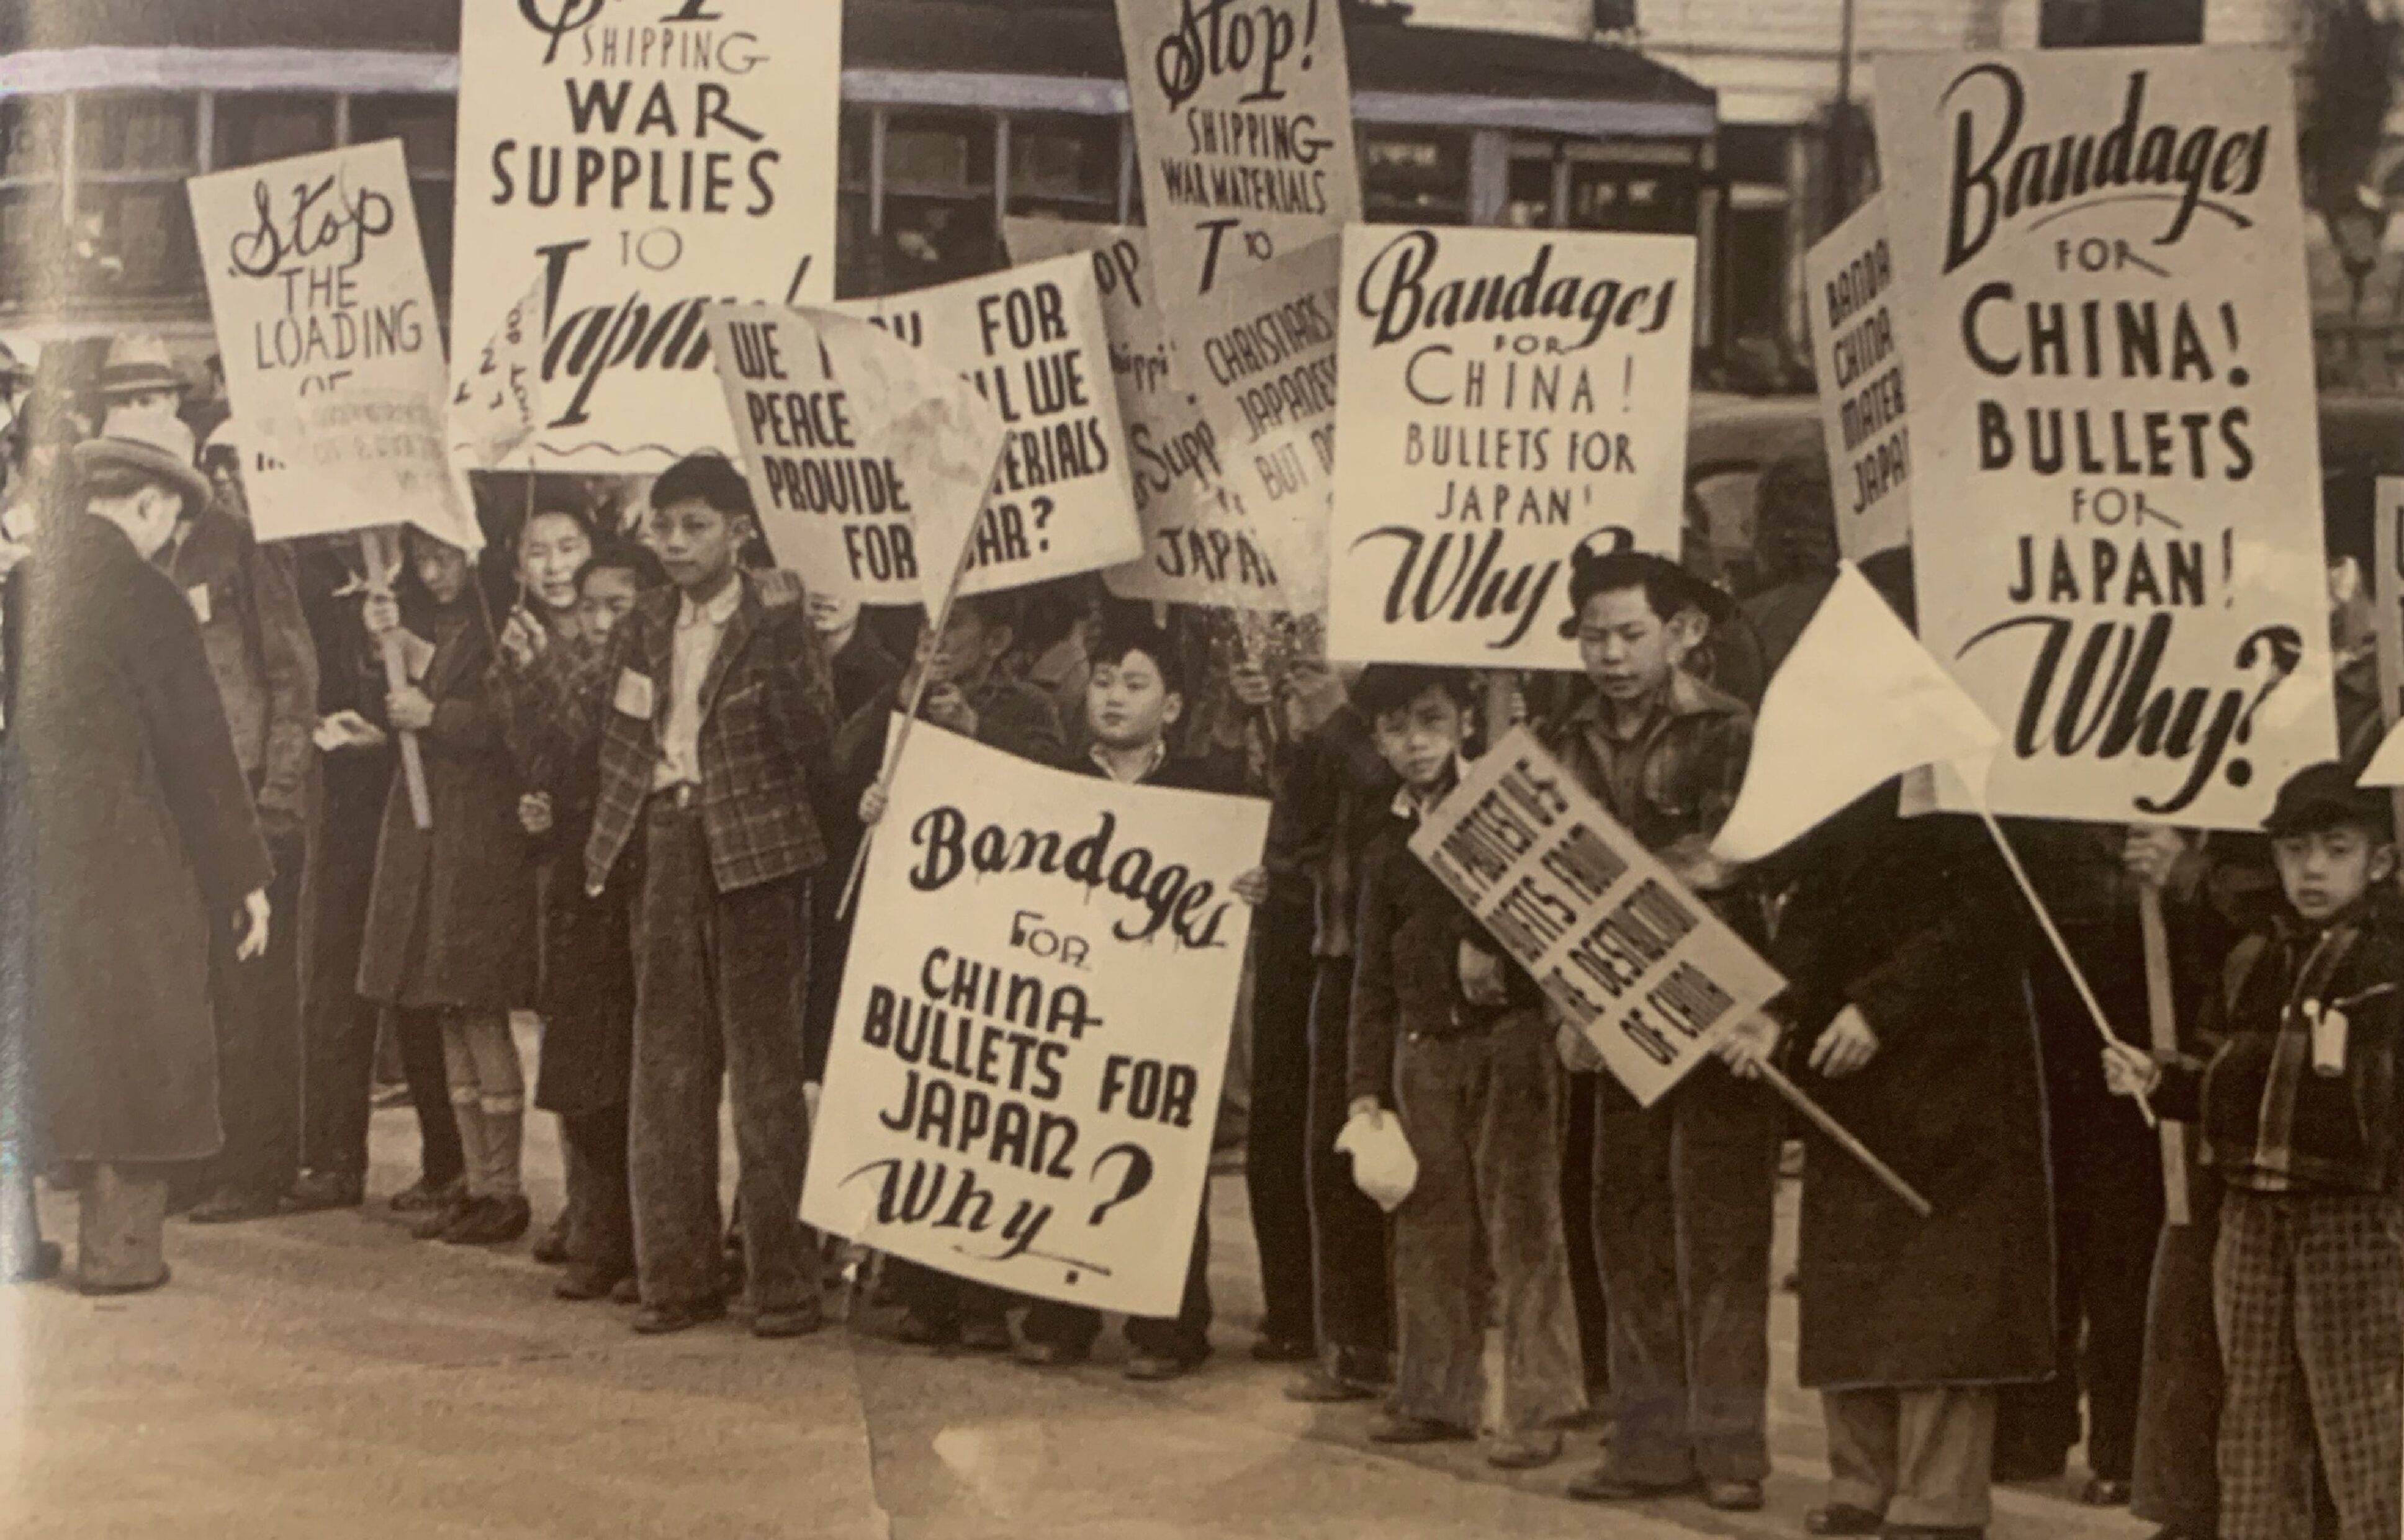 Parades, Pickets, and Protests | The National Endowment for the Humanities